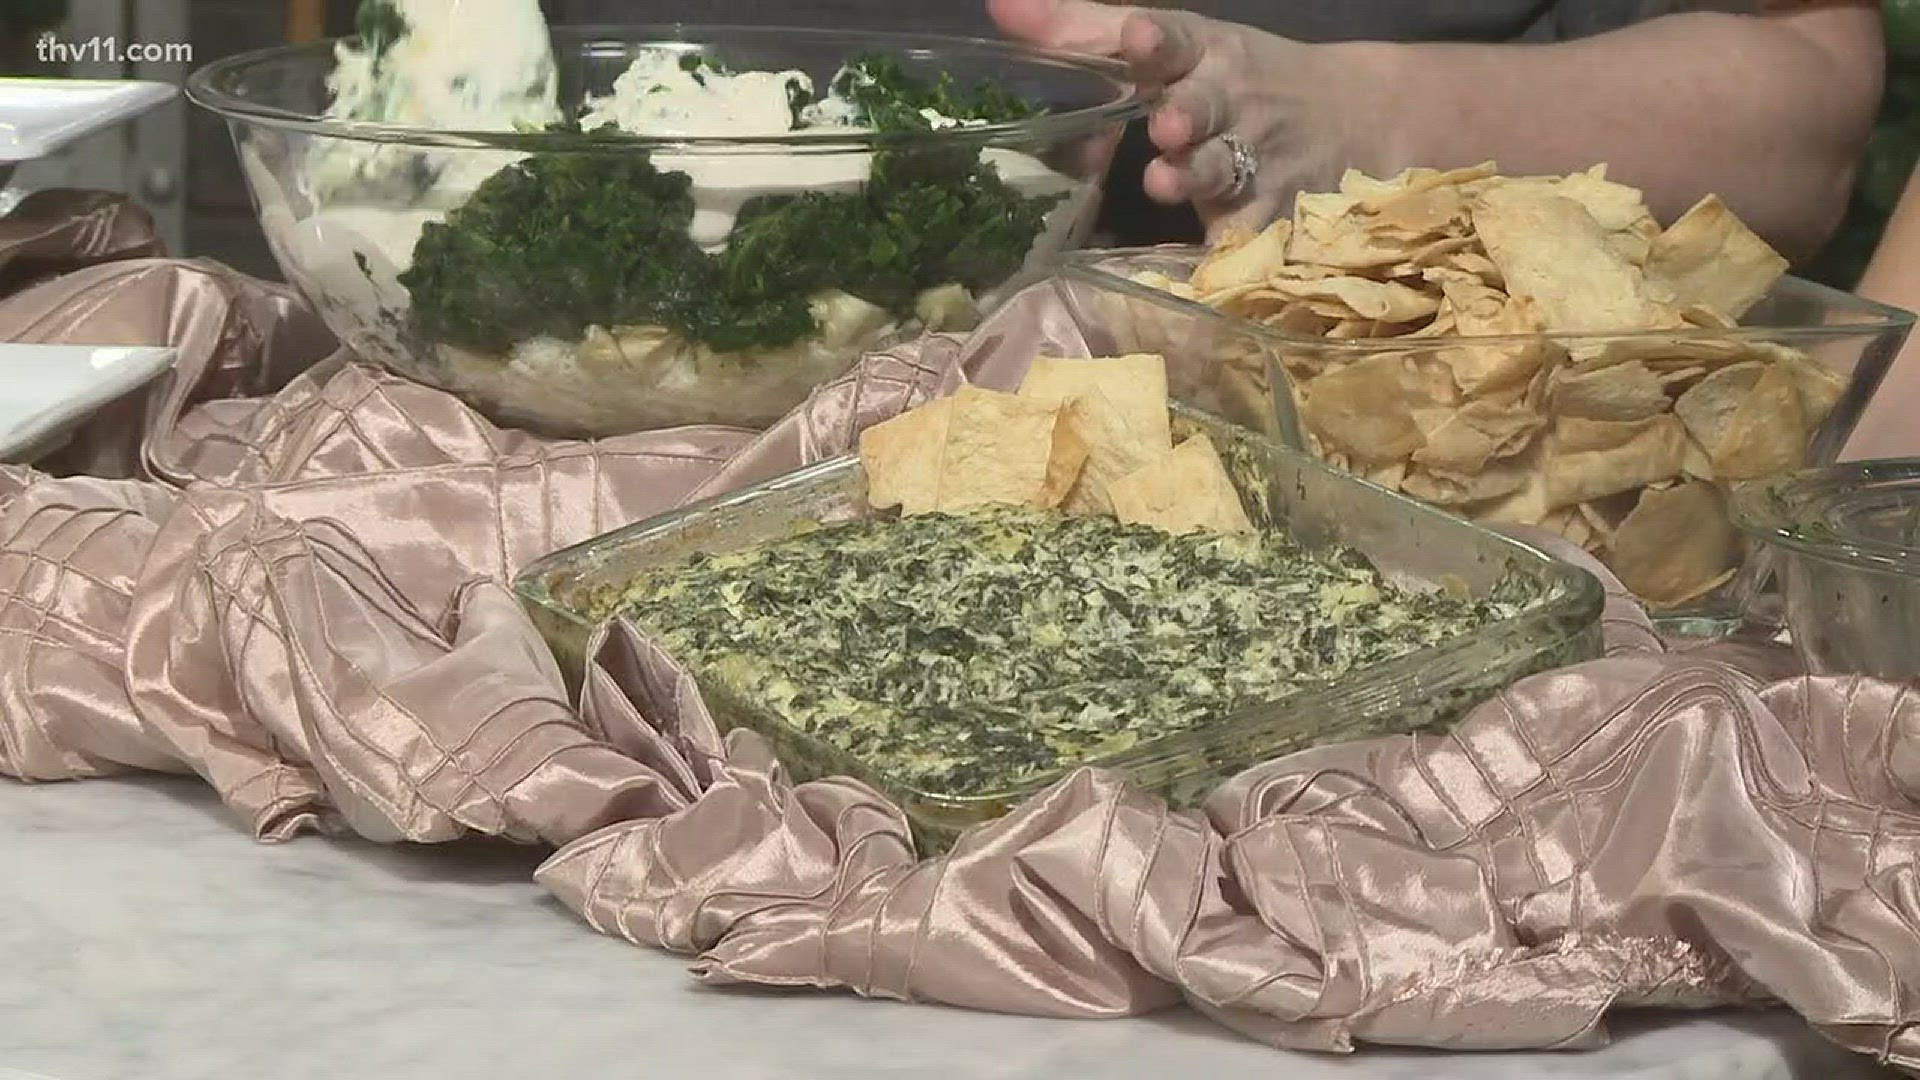 Deanna Fleming has a quick and delicious recipe for spinach artichoke dip